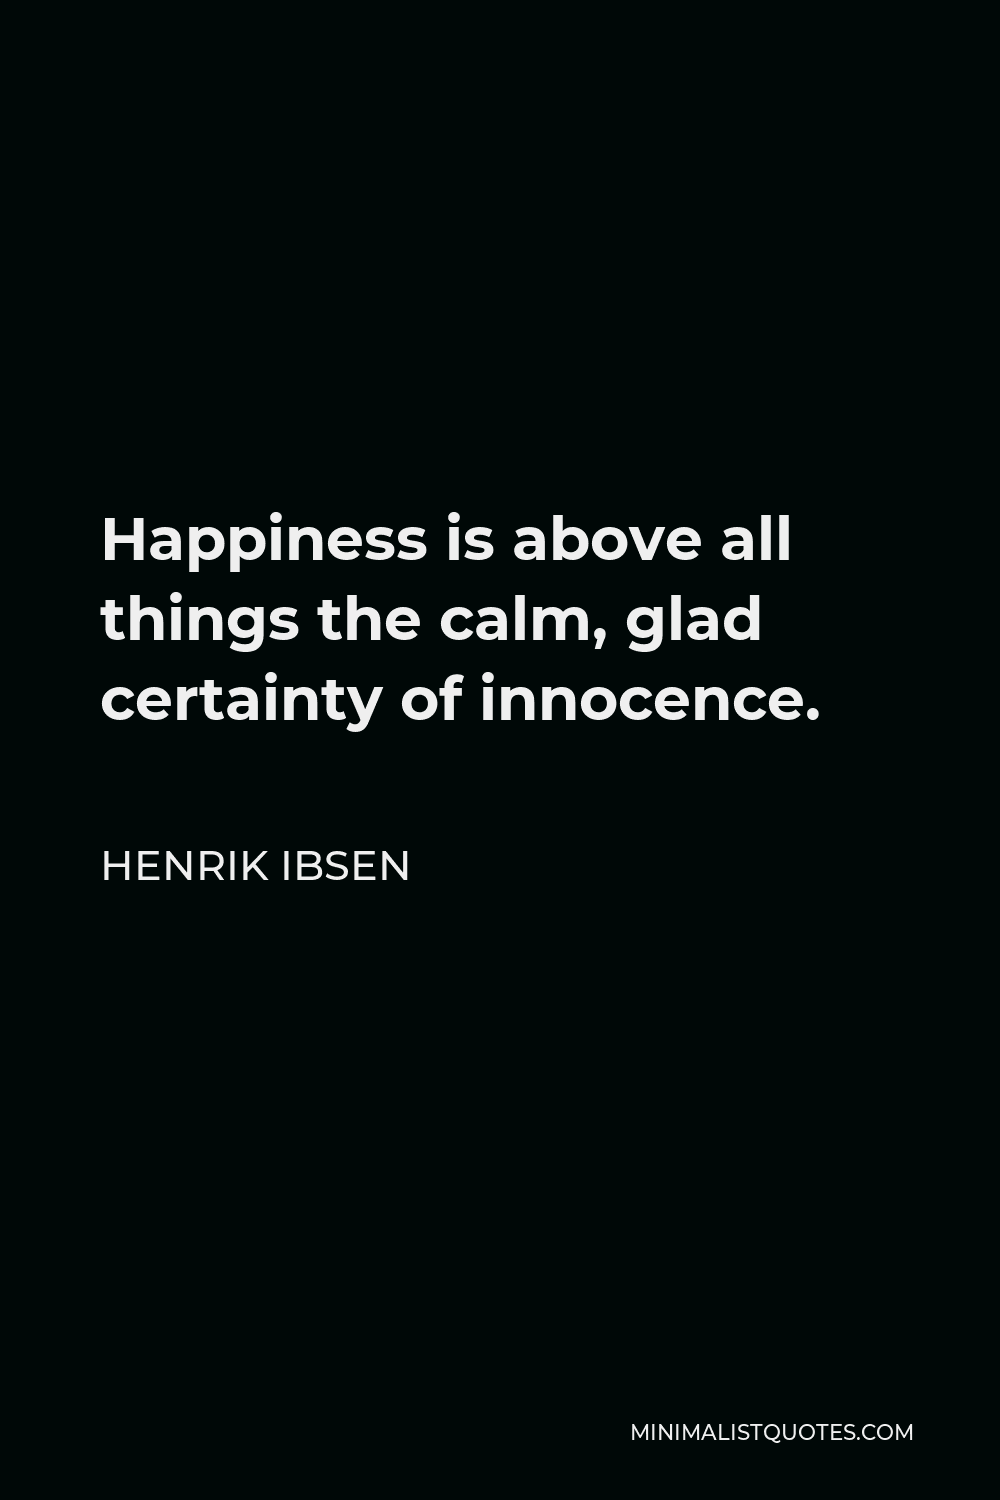 Henrik Ibsen Quote - Happiness is above all things the calm, glad certainty of innocence.